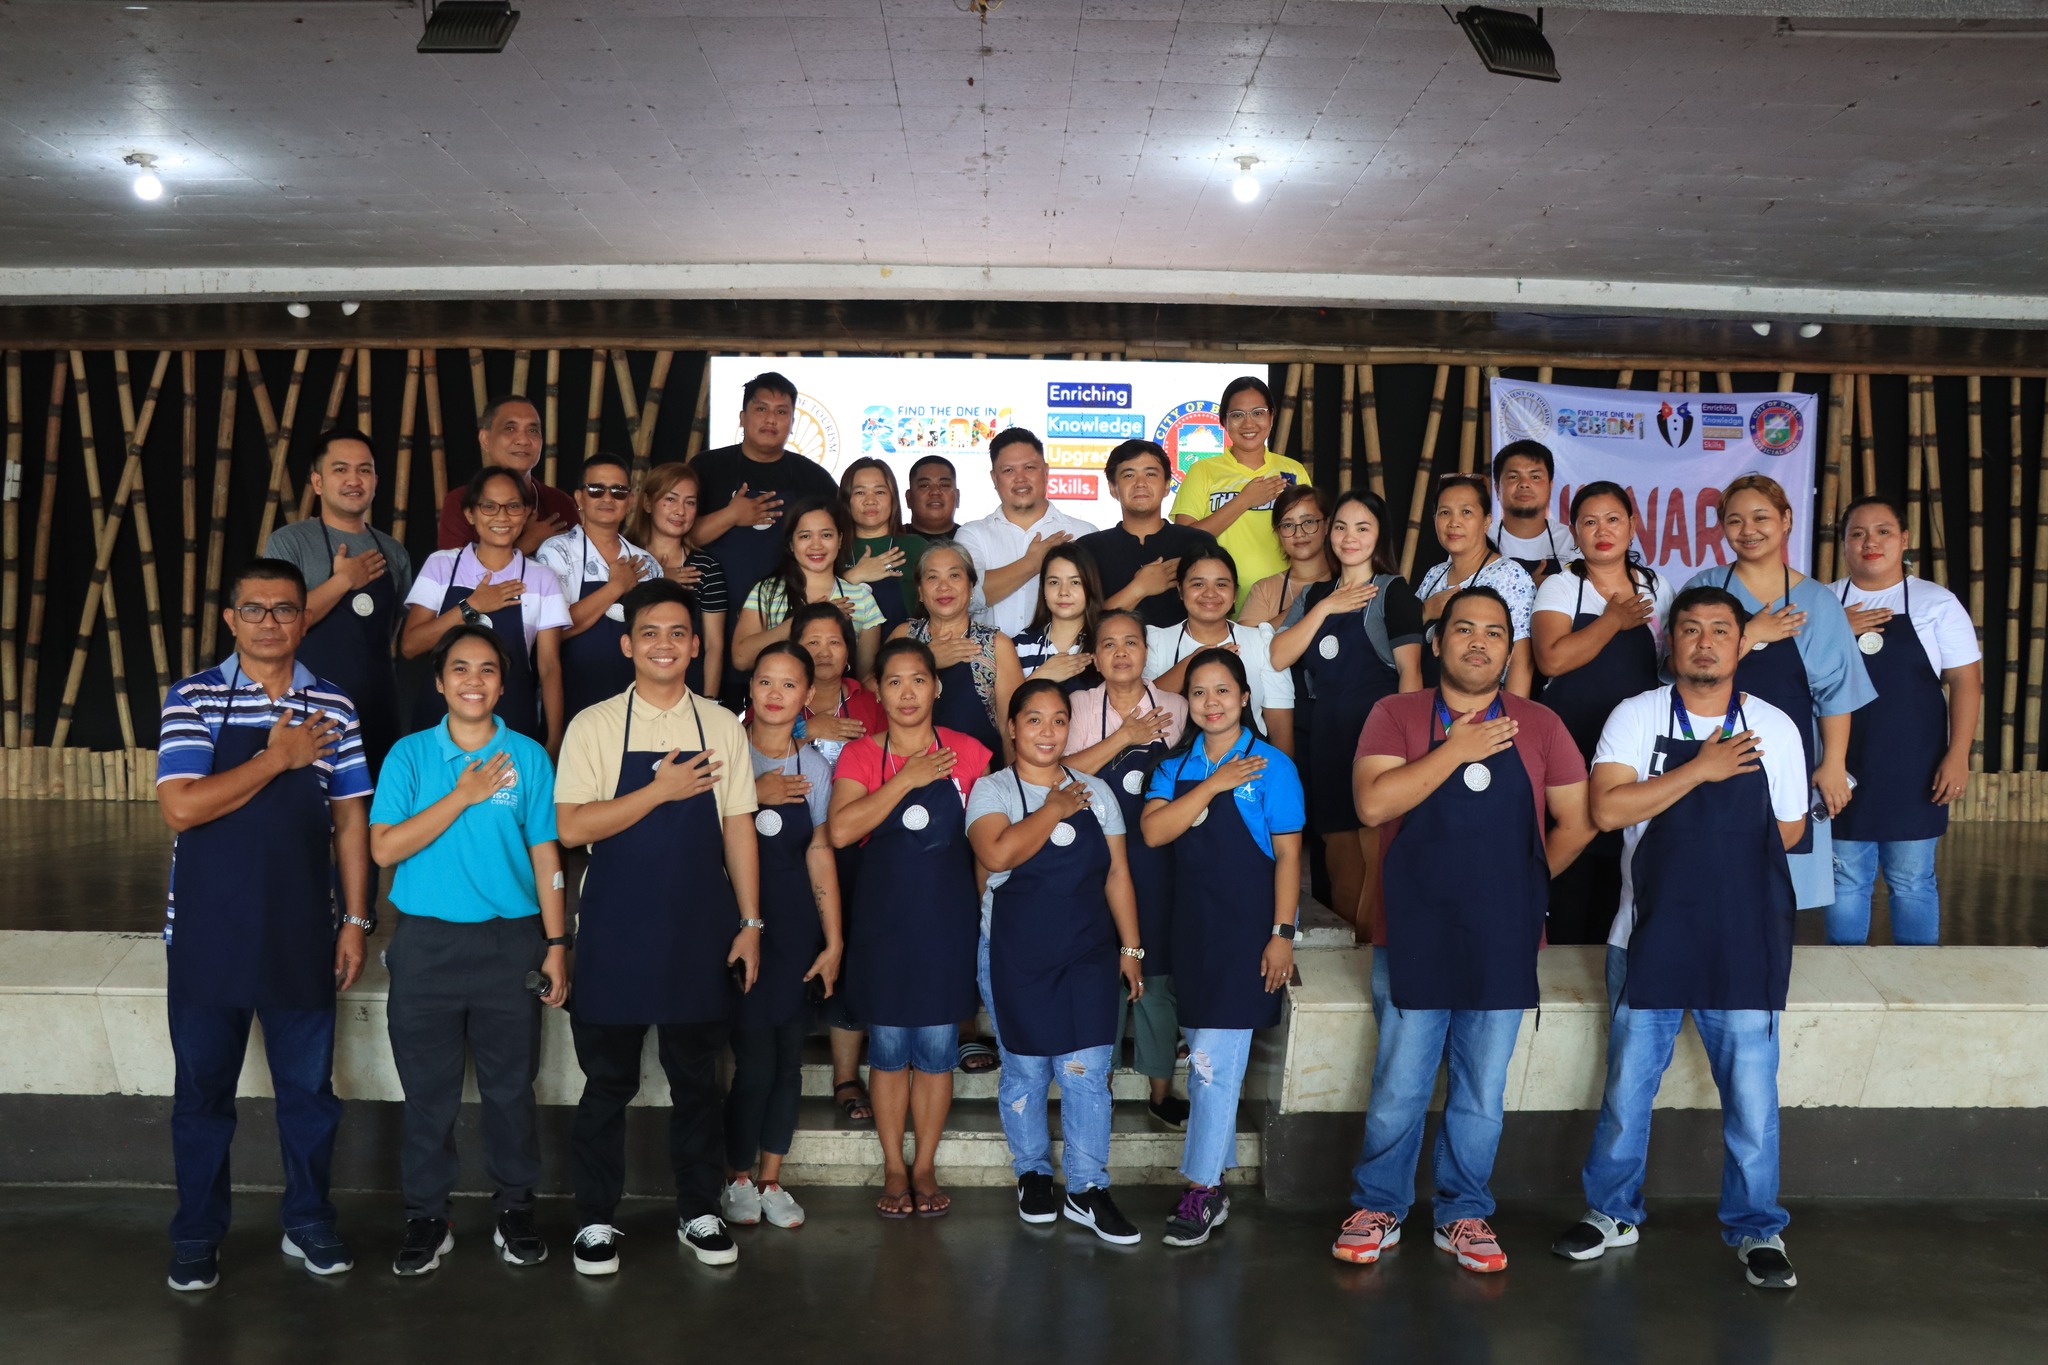 DOT AND CGB CONDUCT KULINARYA WORKSHOP AS PART OF TOURISM MONTH CELEBRATIONS